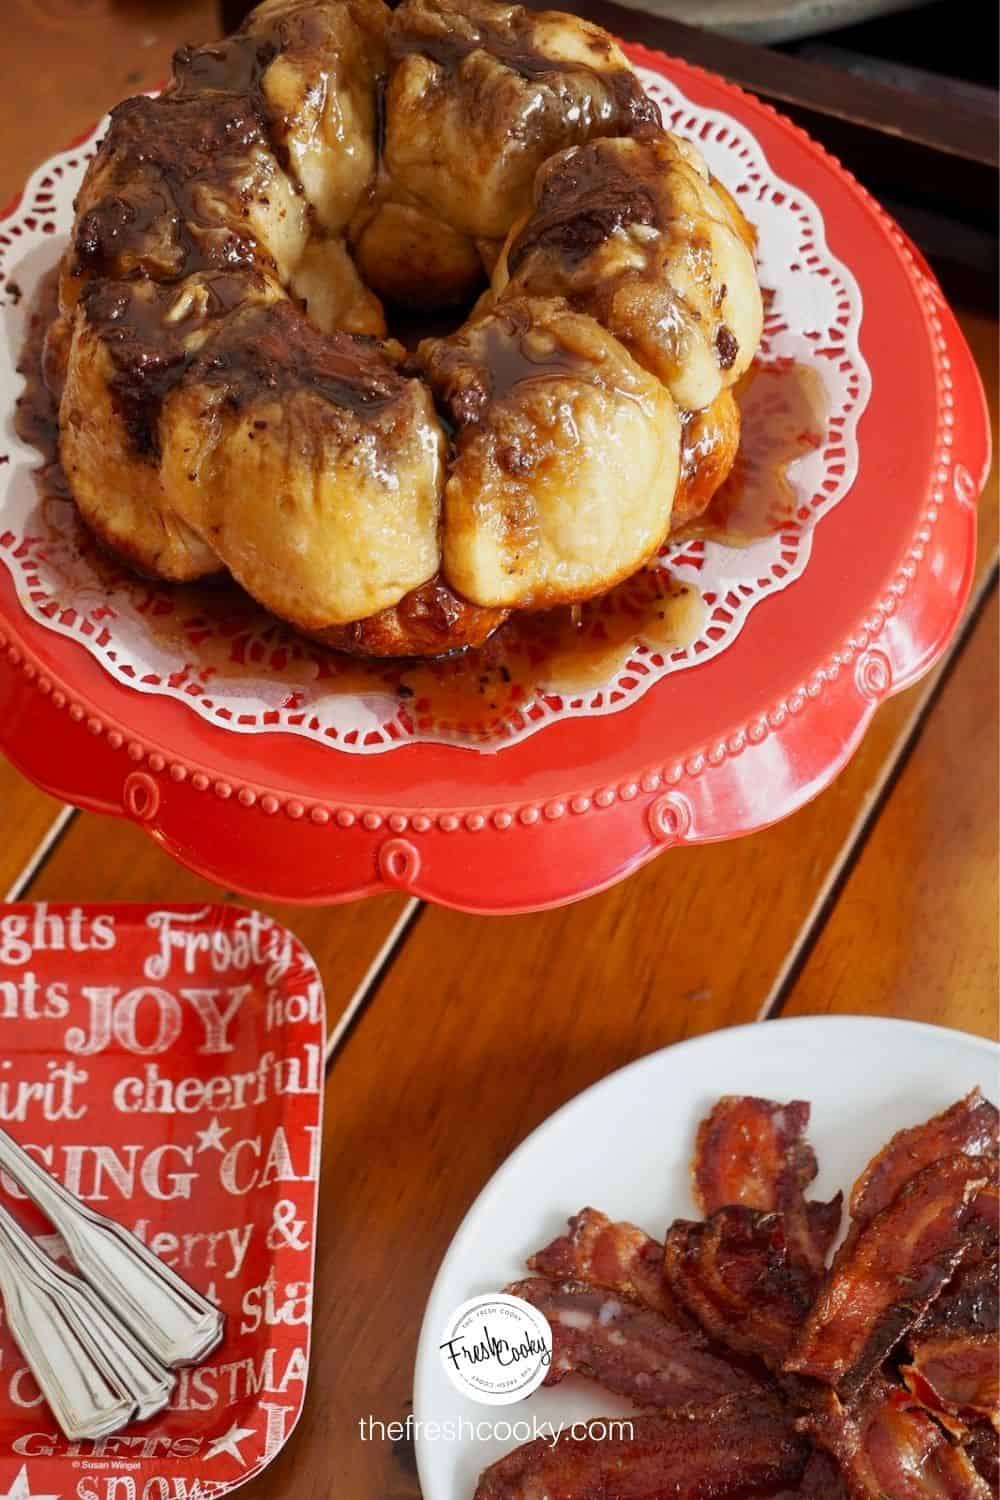 image of small chocolate monkey bread recipe on a red pedestal with a doily, sitting on a table with candied bacon and paper plates with forks nearby.